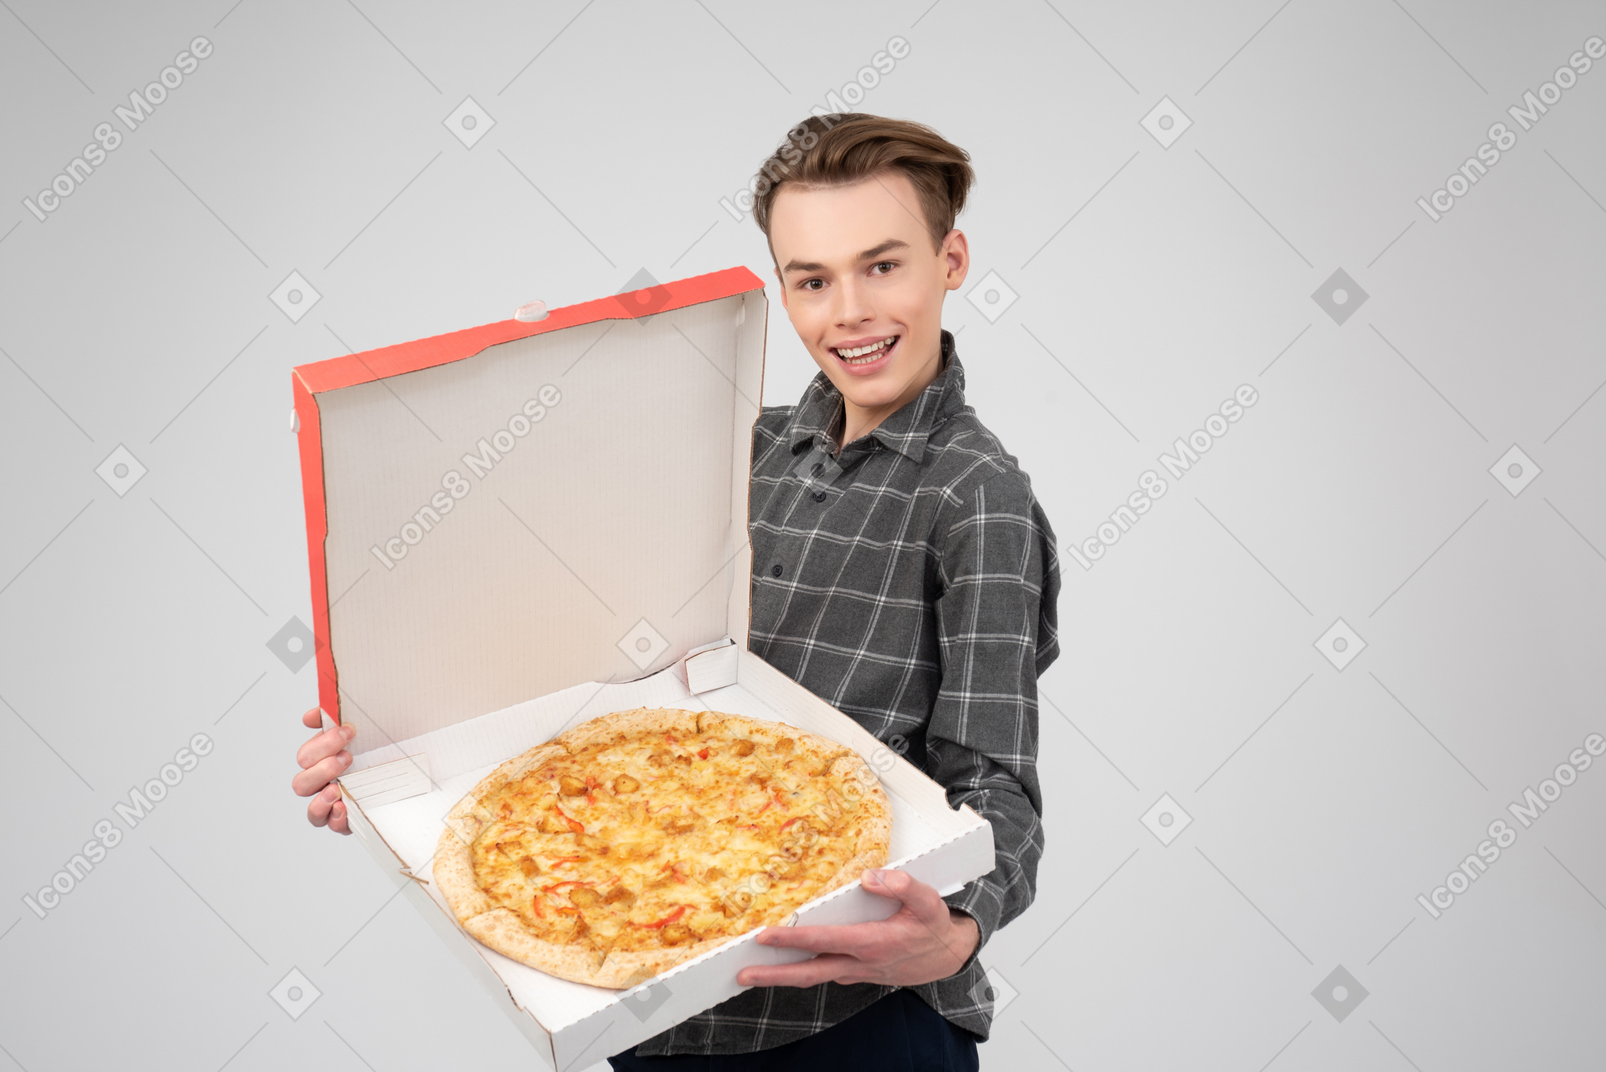 Handsome young guy holding pizza